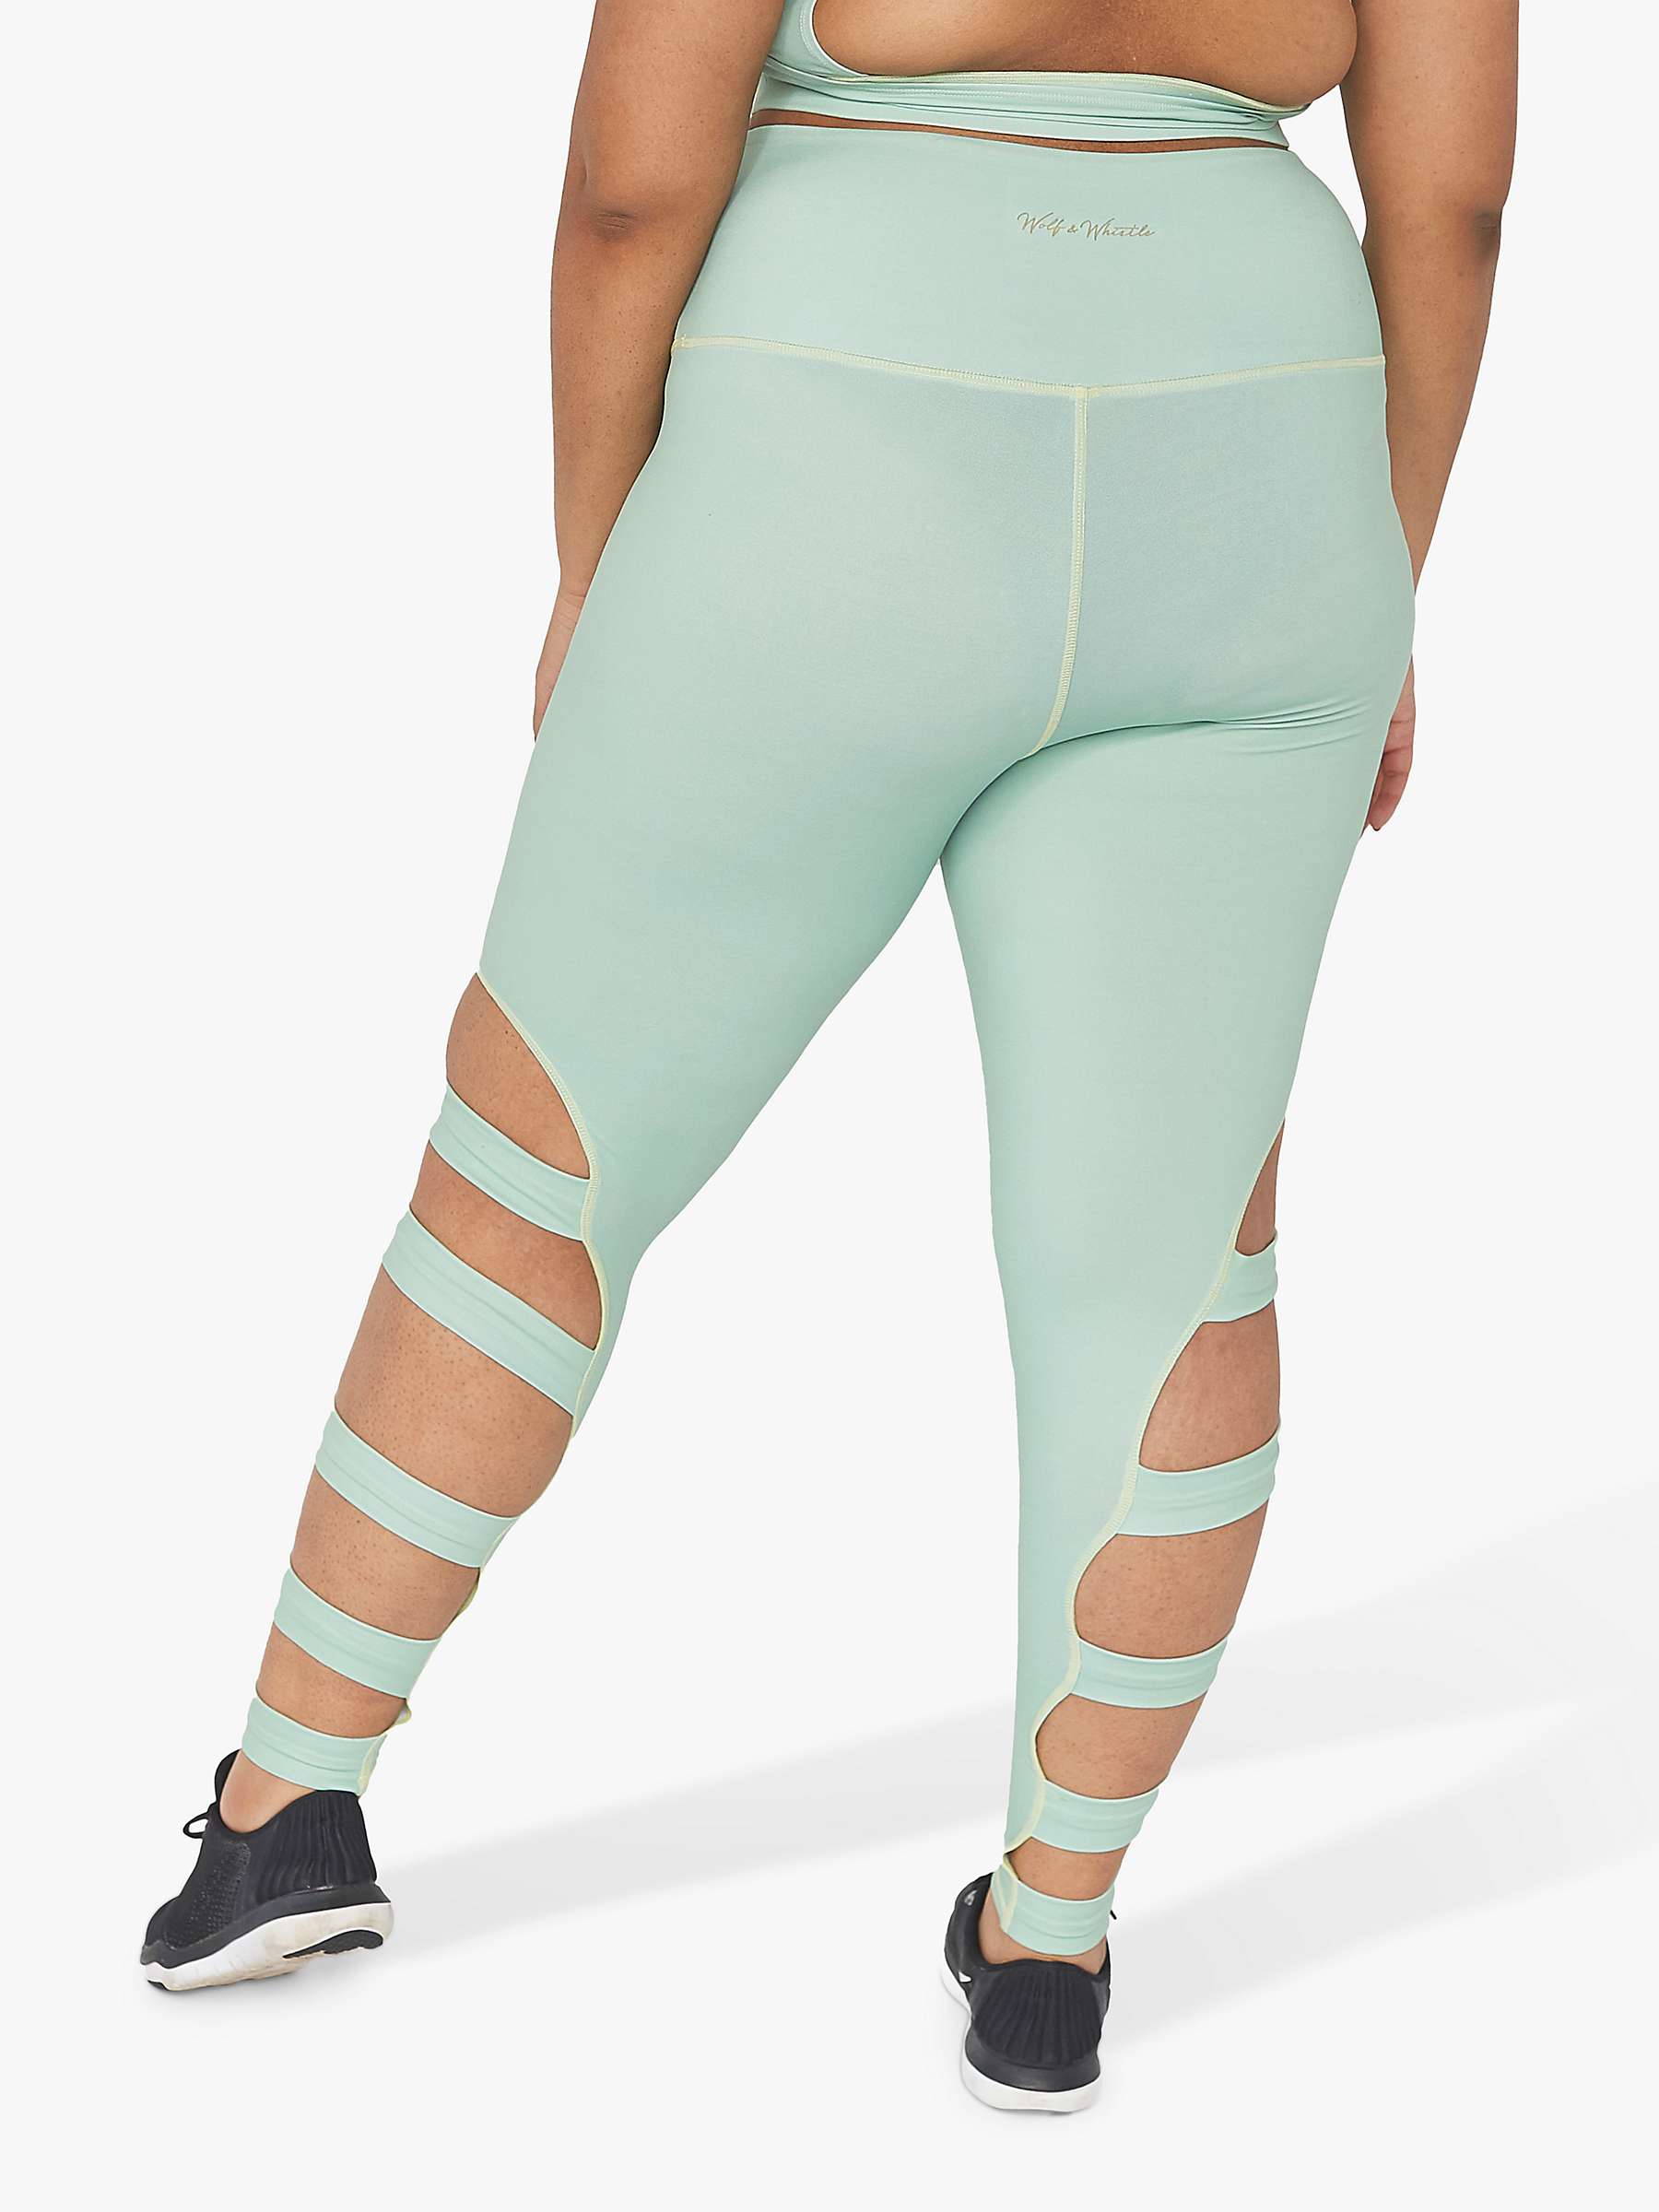 Buy Wolf & Whistle High Waist Cut Out Leggings, Green Online at johnlewis.com